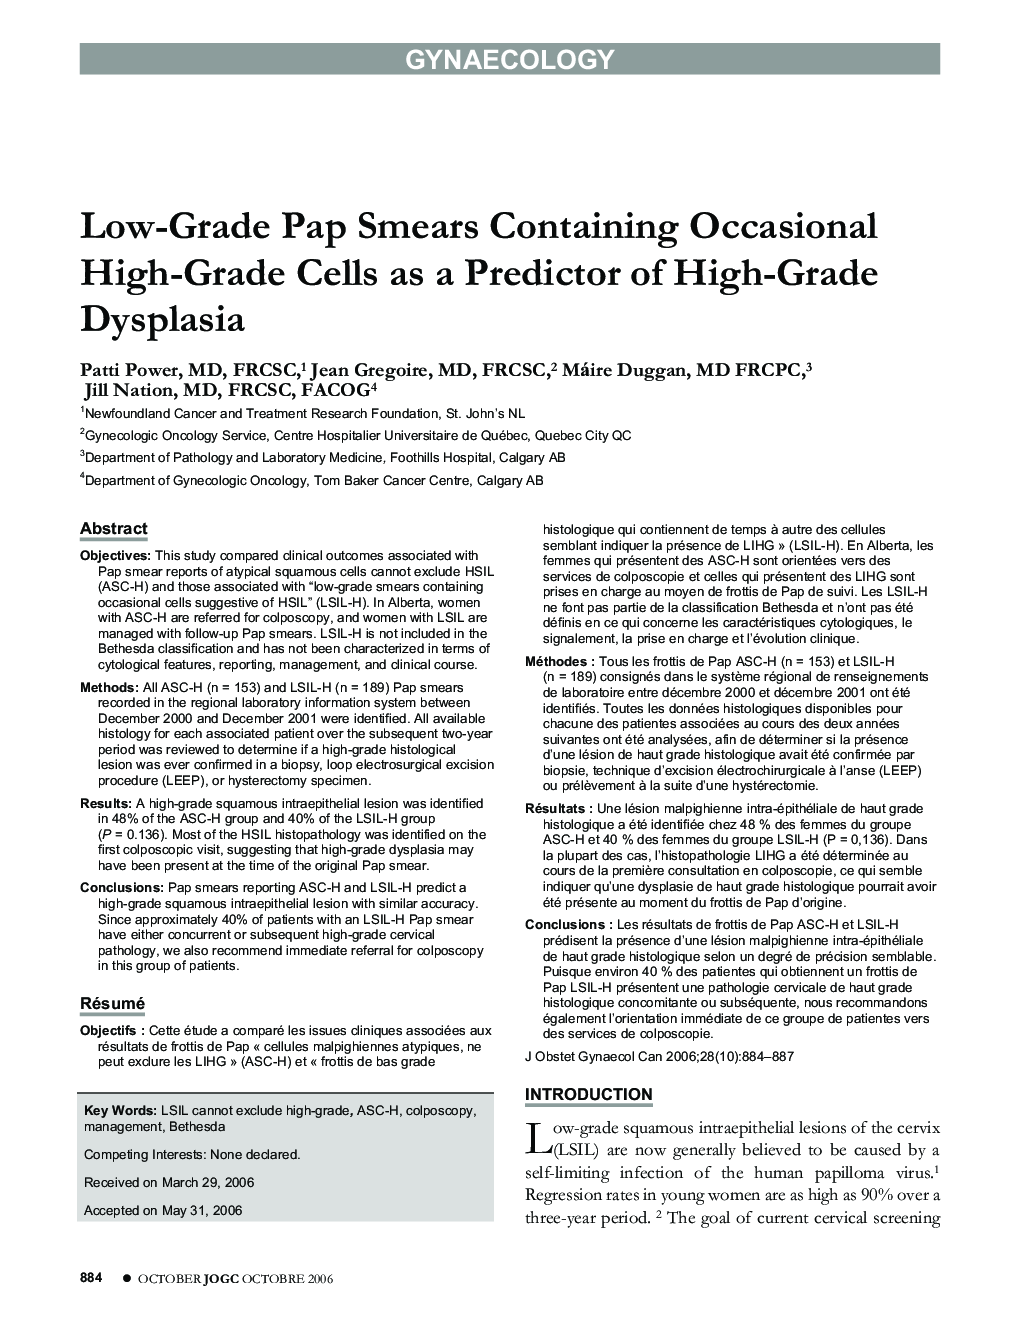 Low-Grade Pap Smears Containing Occasional High-Grade Cells as a Predictor of High-Grade Dysplasia